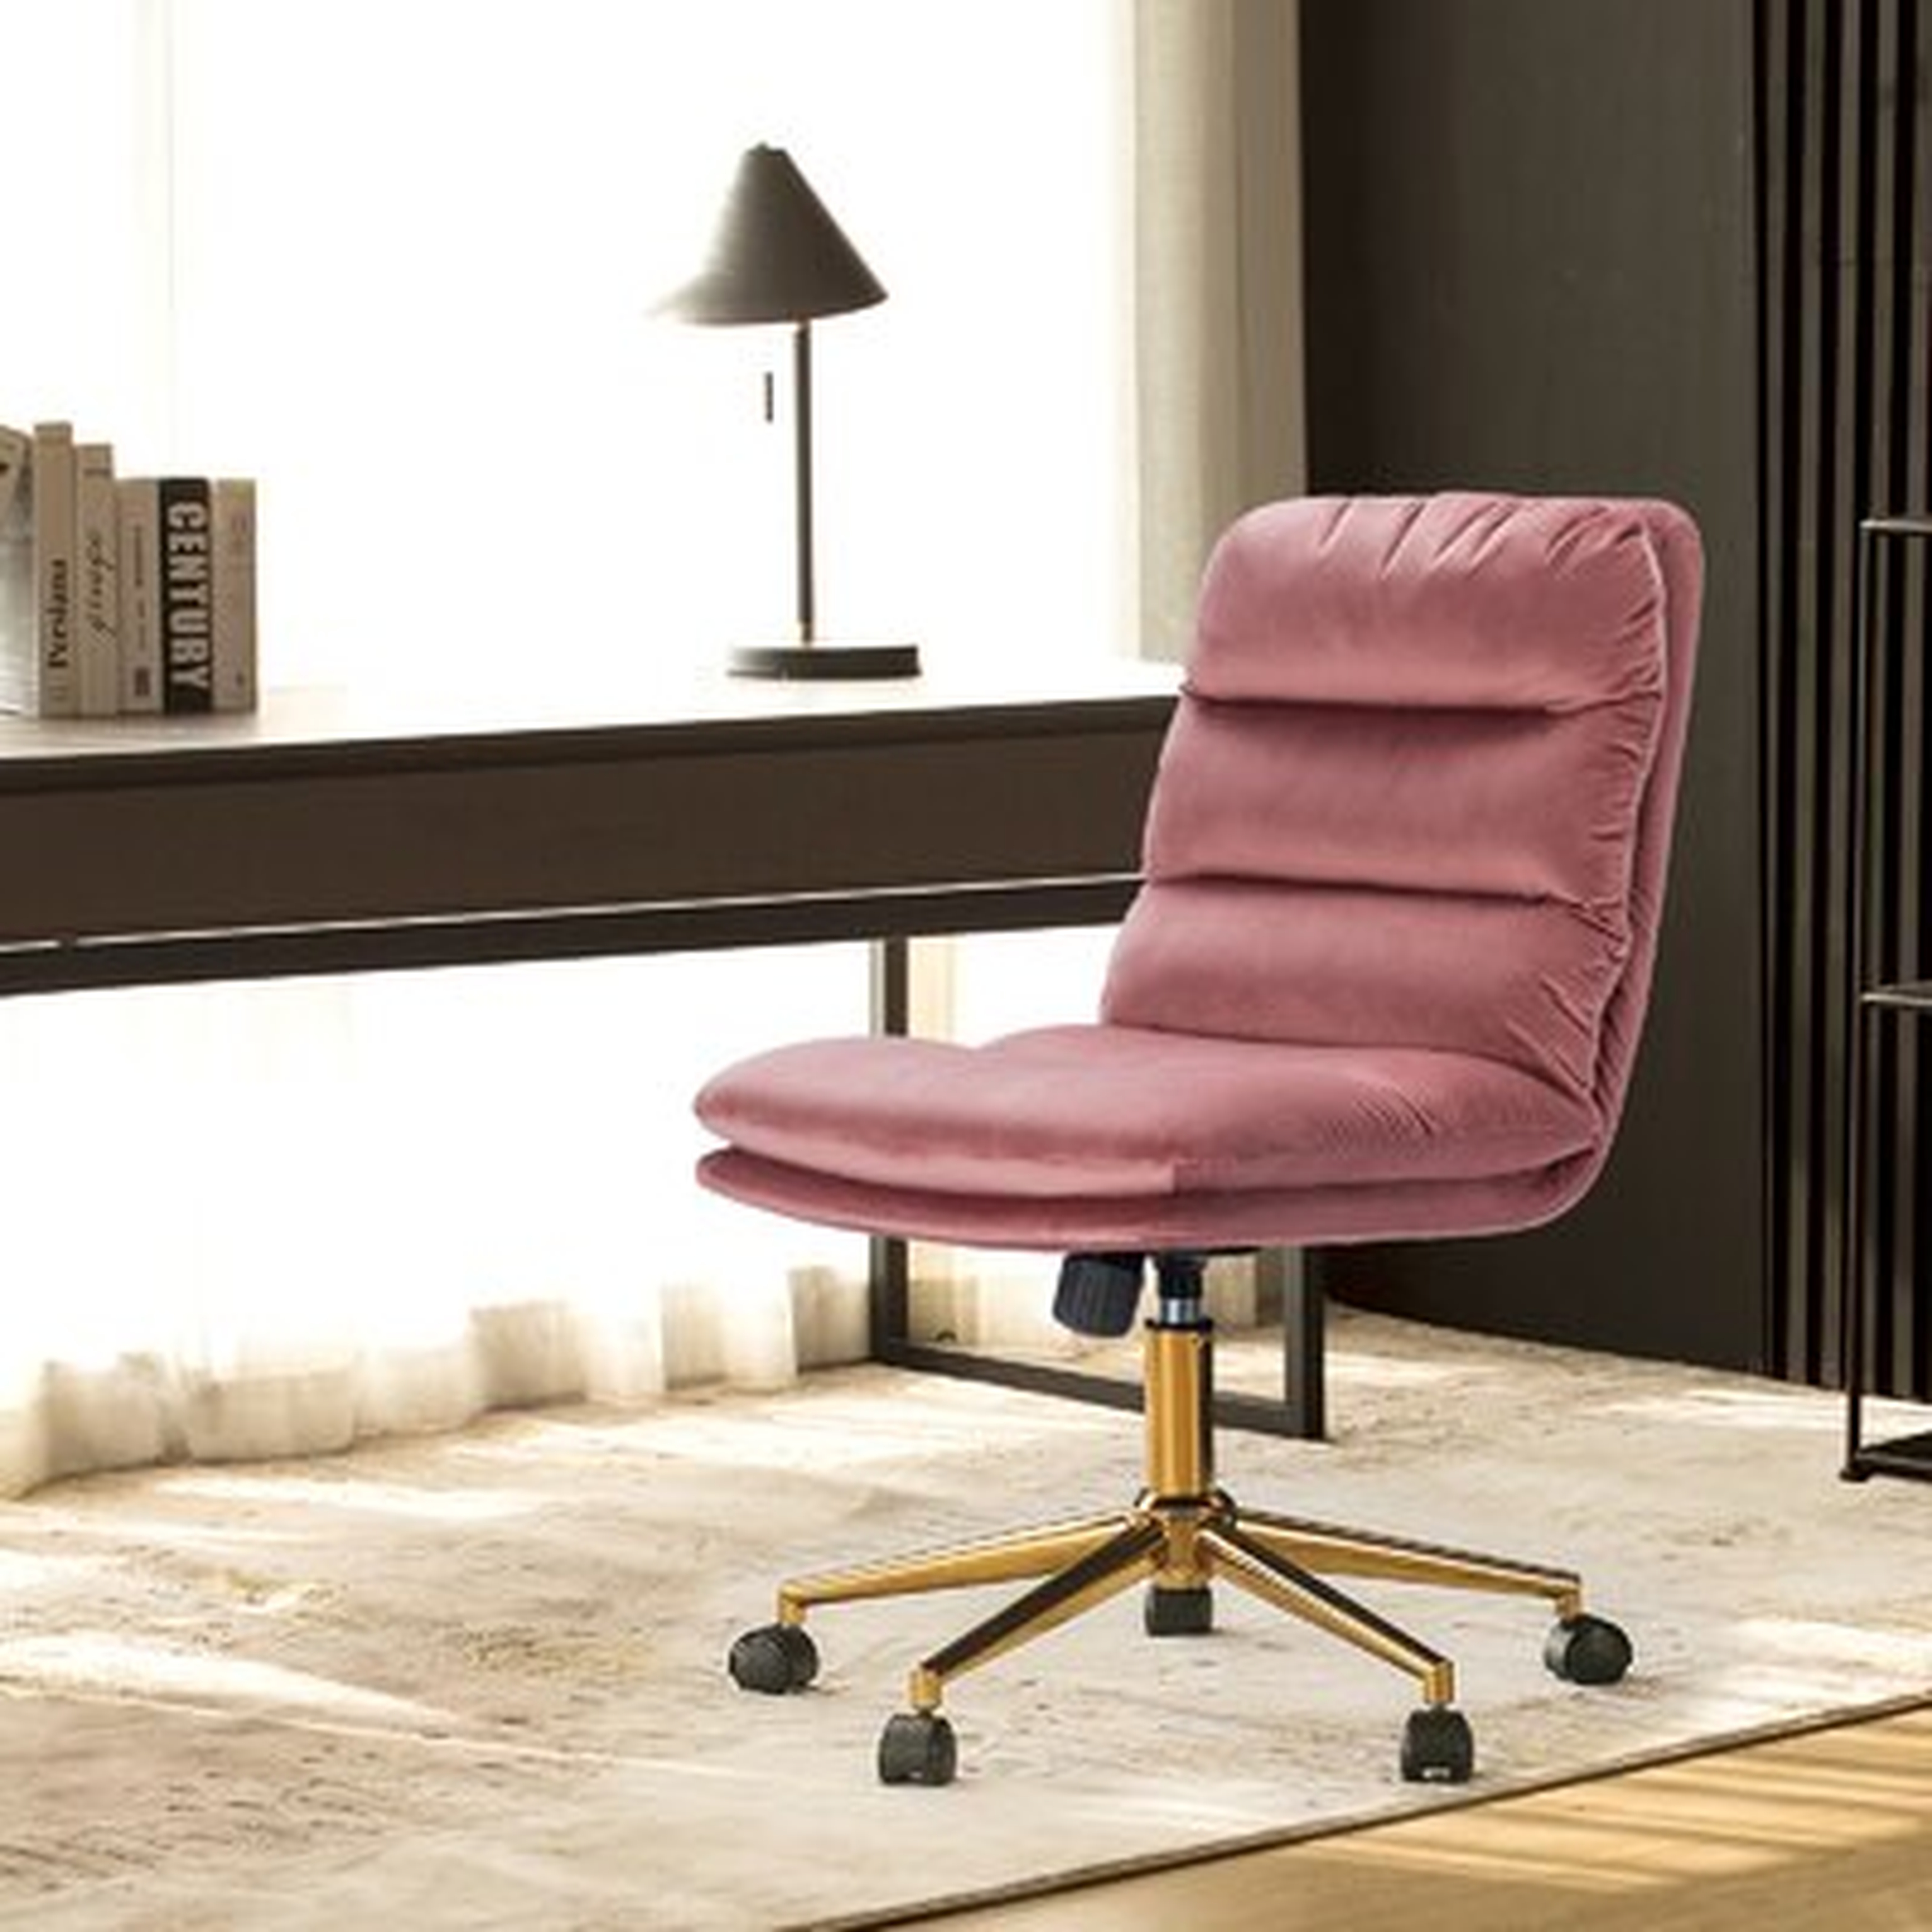 Aged Fabric Office Chair With Black Base Height Adjustable Swivel Task Chair With Casters - Wayfair